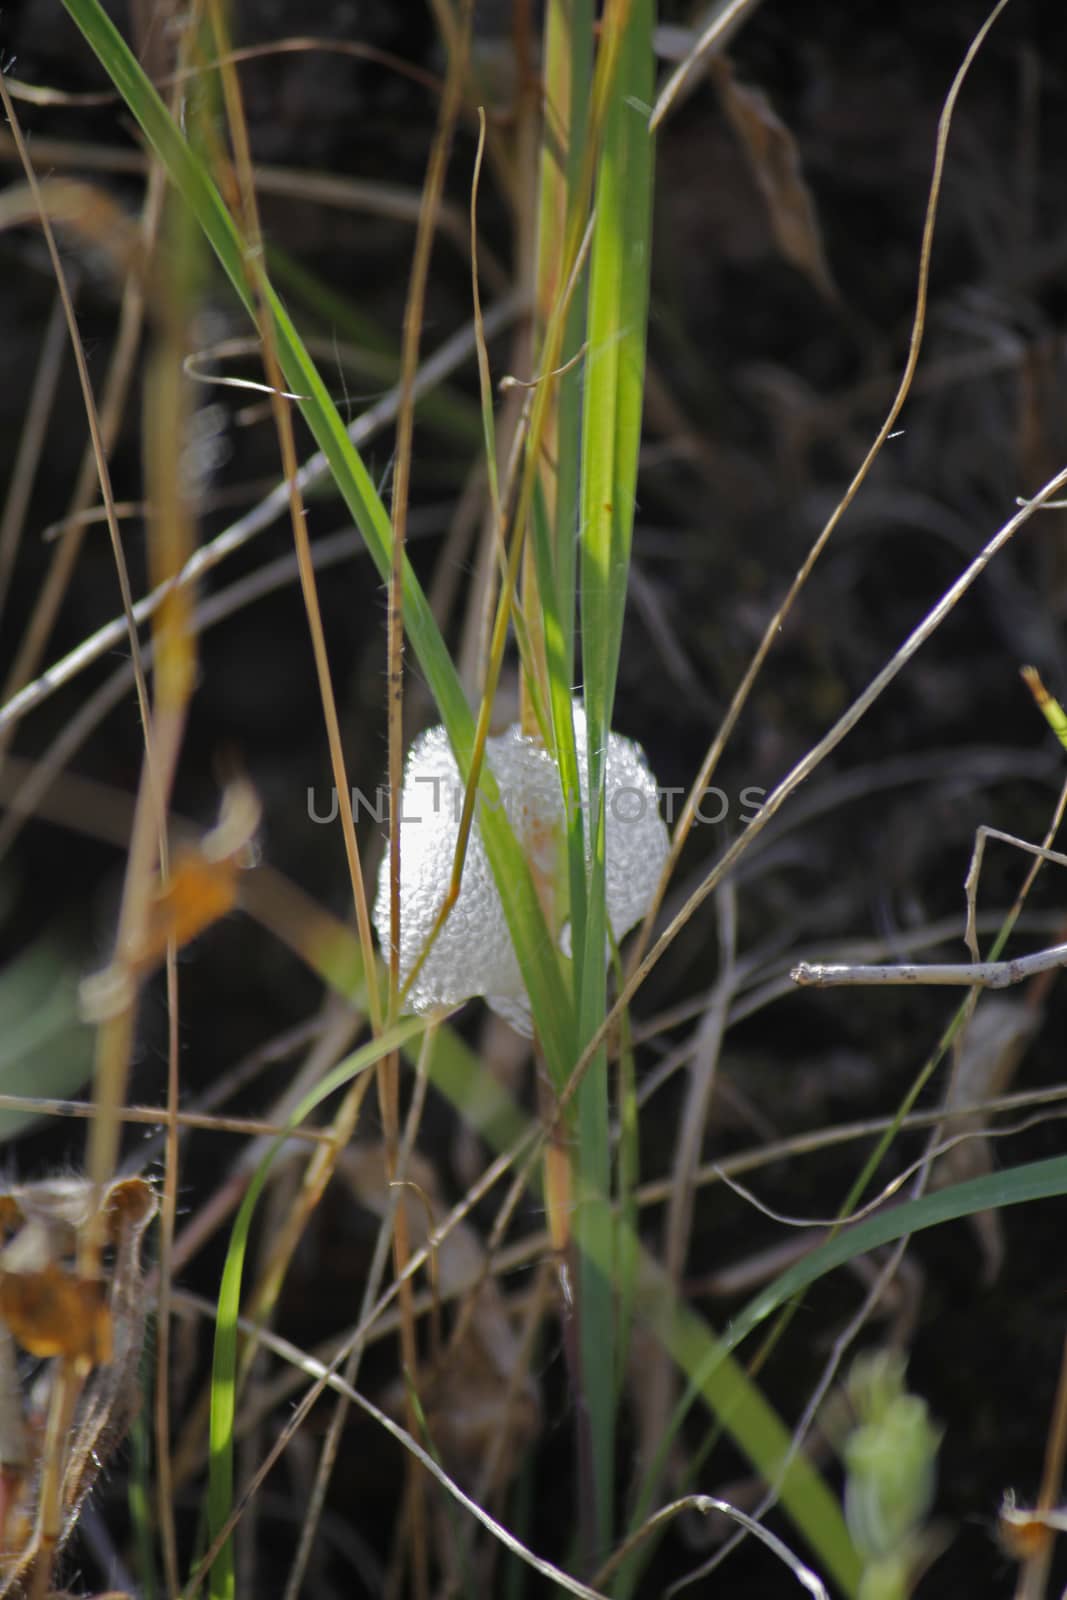 Cocoon Of Froghopper, Spittlebug Larvae, Cuckoo Spit. These families are best known for the nymph stage, which produces a cover of frothed-up plant sap resembling spit; the nymphs are therefore commonly known as spittlebugs and their froth as cuckoo spit.